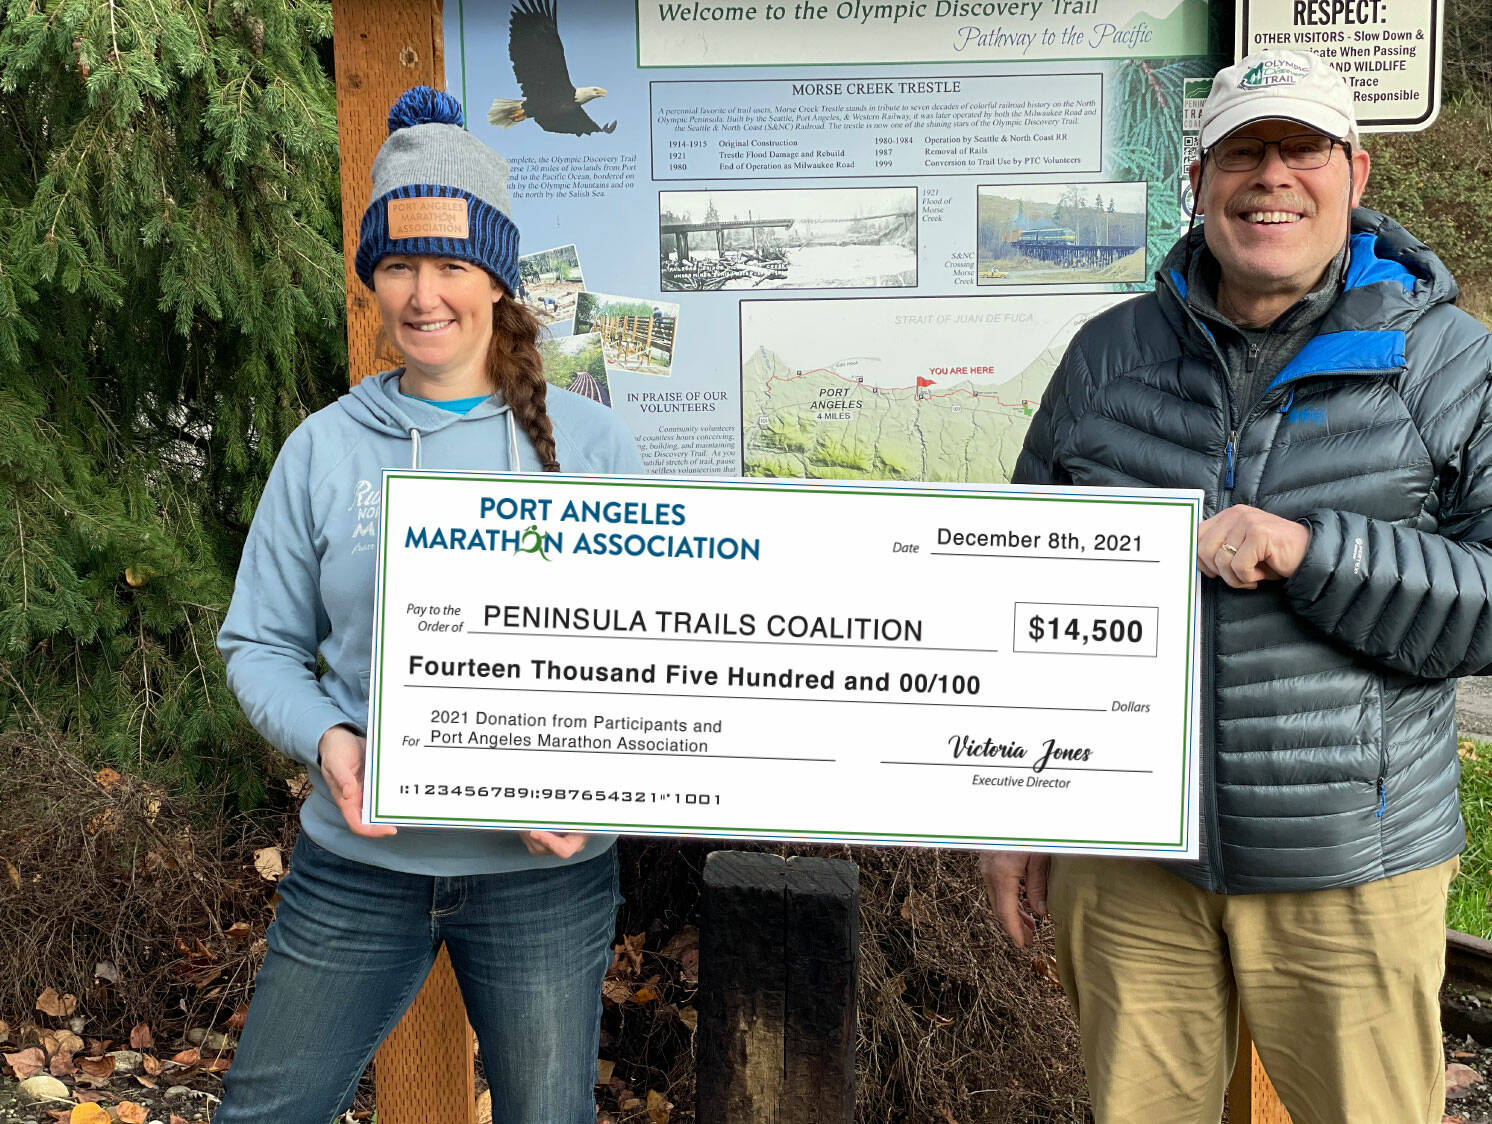 Jeff Bohman, Peninsula Trails Coalition, receives a donation check from Race Director Victoria Jones at the Morse Creek Olympic Discovery Trail trailhead. (Photo courtesy Dave Lasorsa)